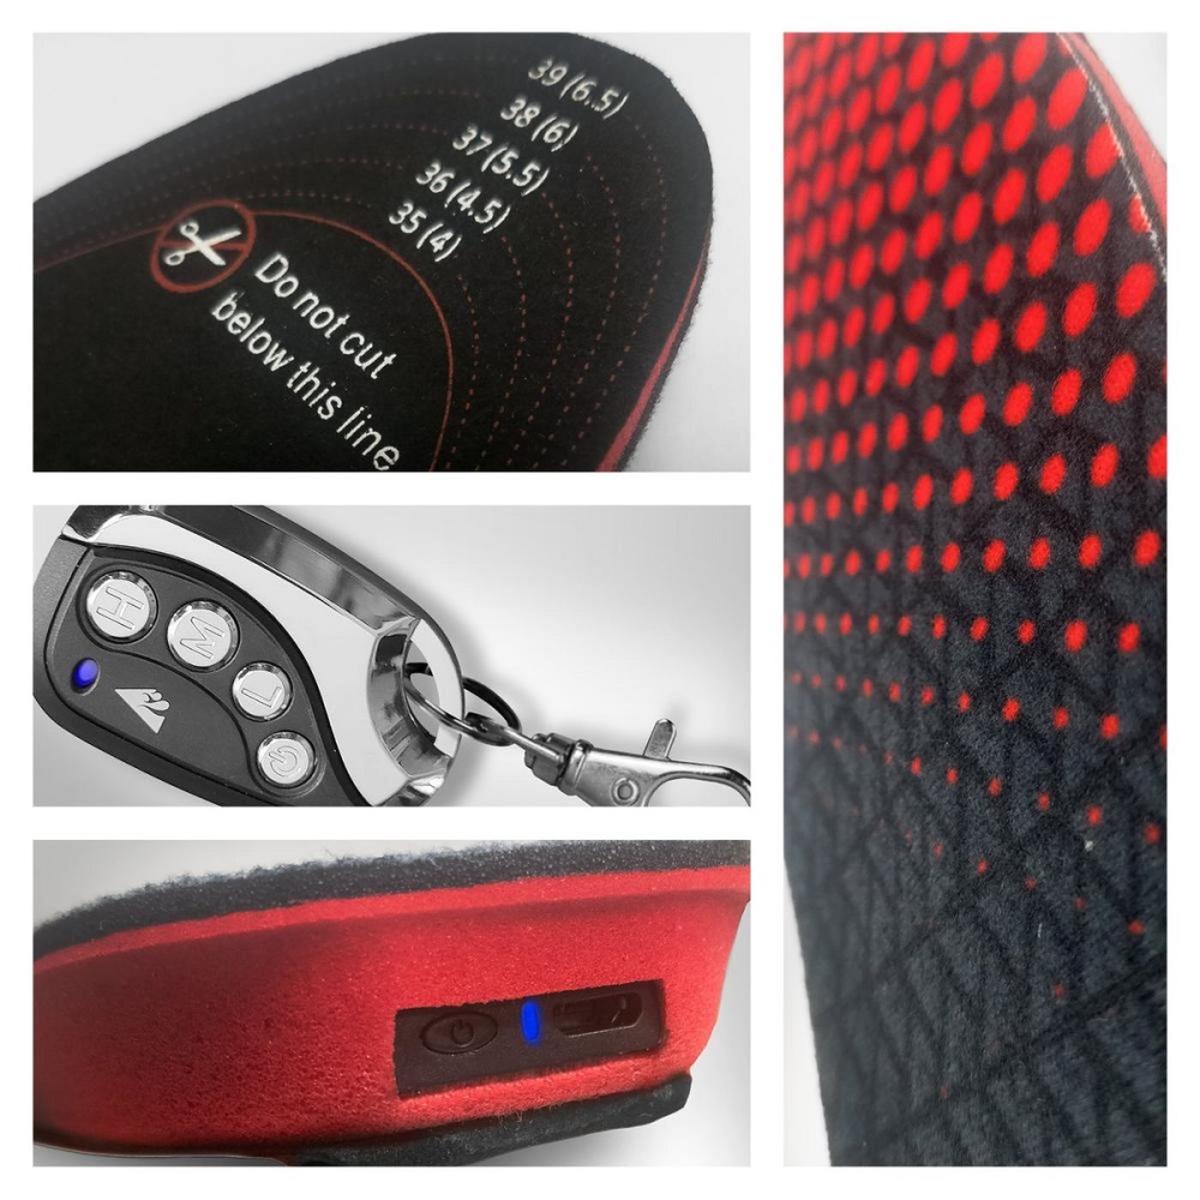 Open Box ActionHeat Rechargeable Battery Heated Insoles - Battery